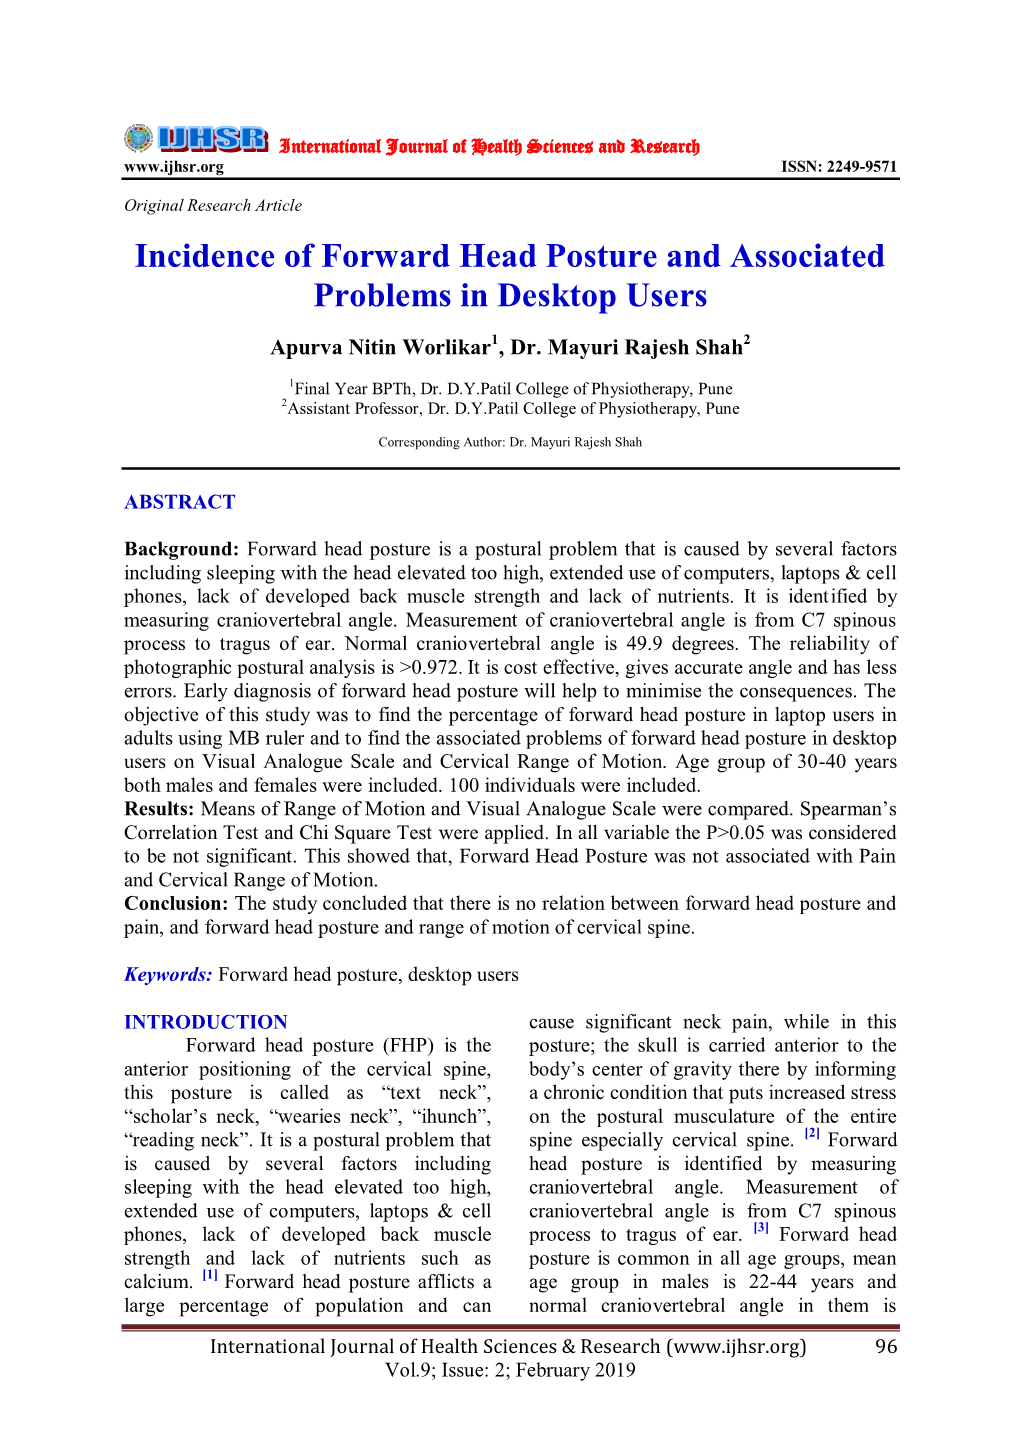 Incidence of Forward Head Posture and Associated Problems in Desktop Users